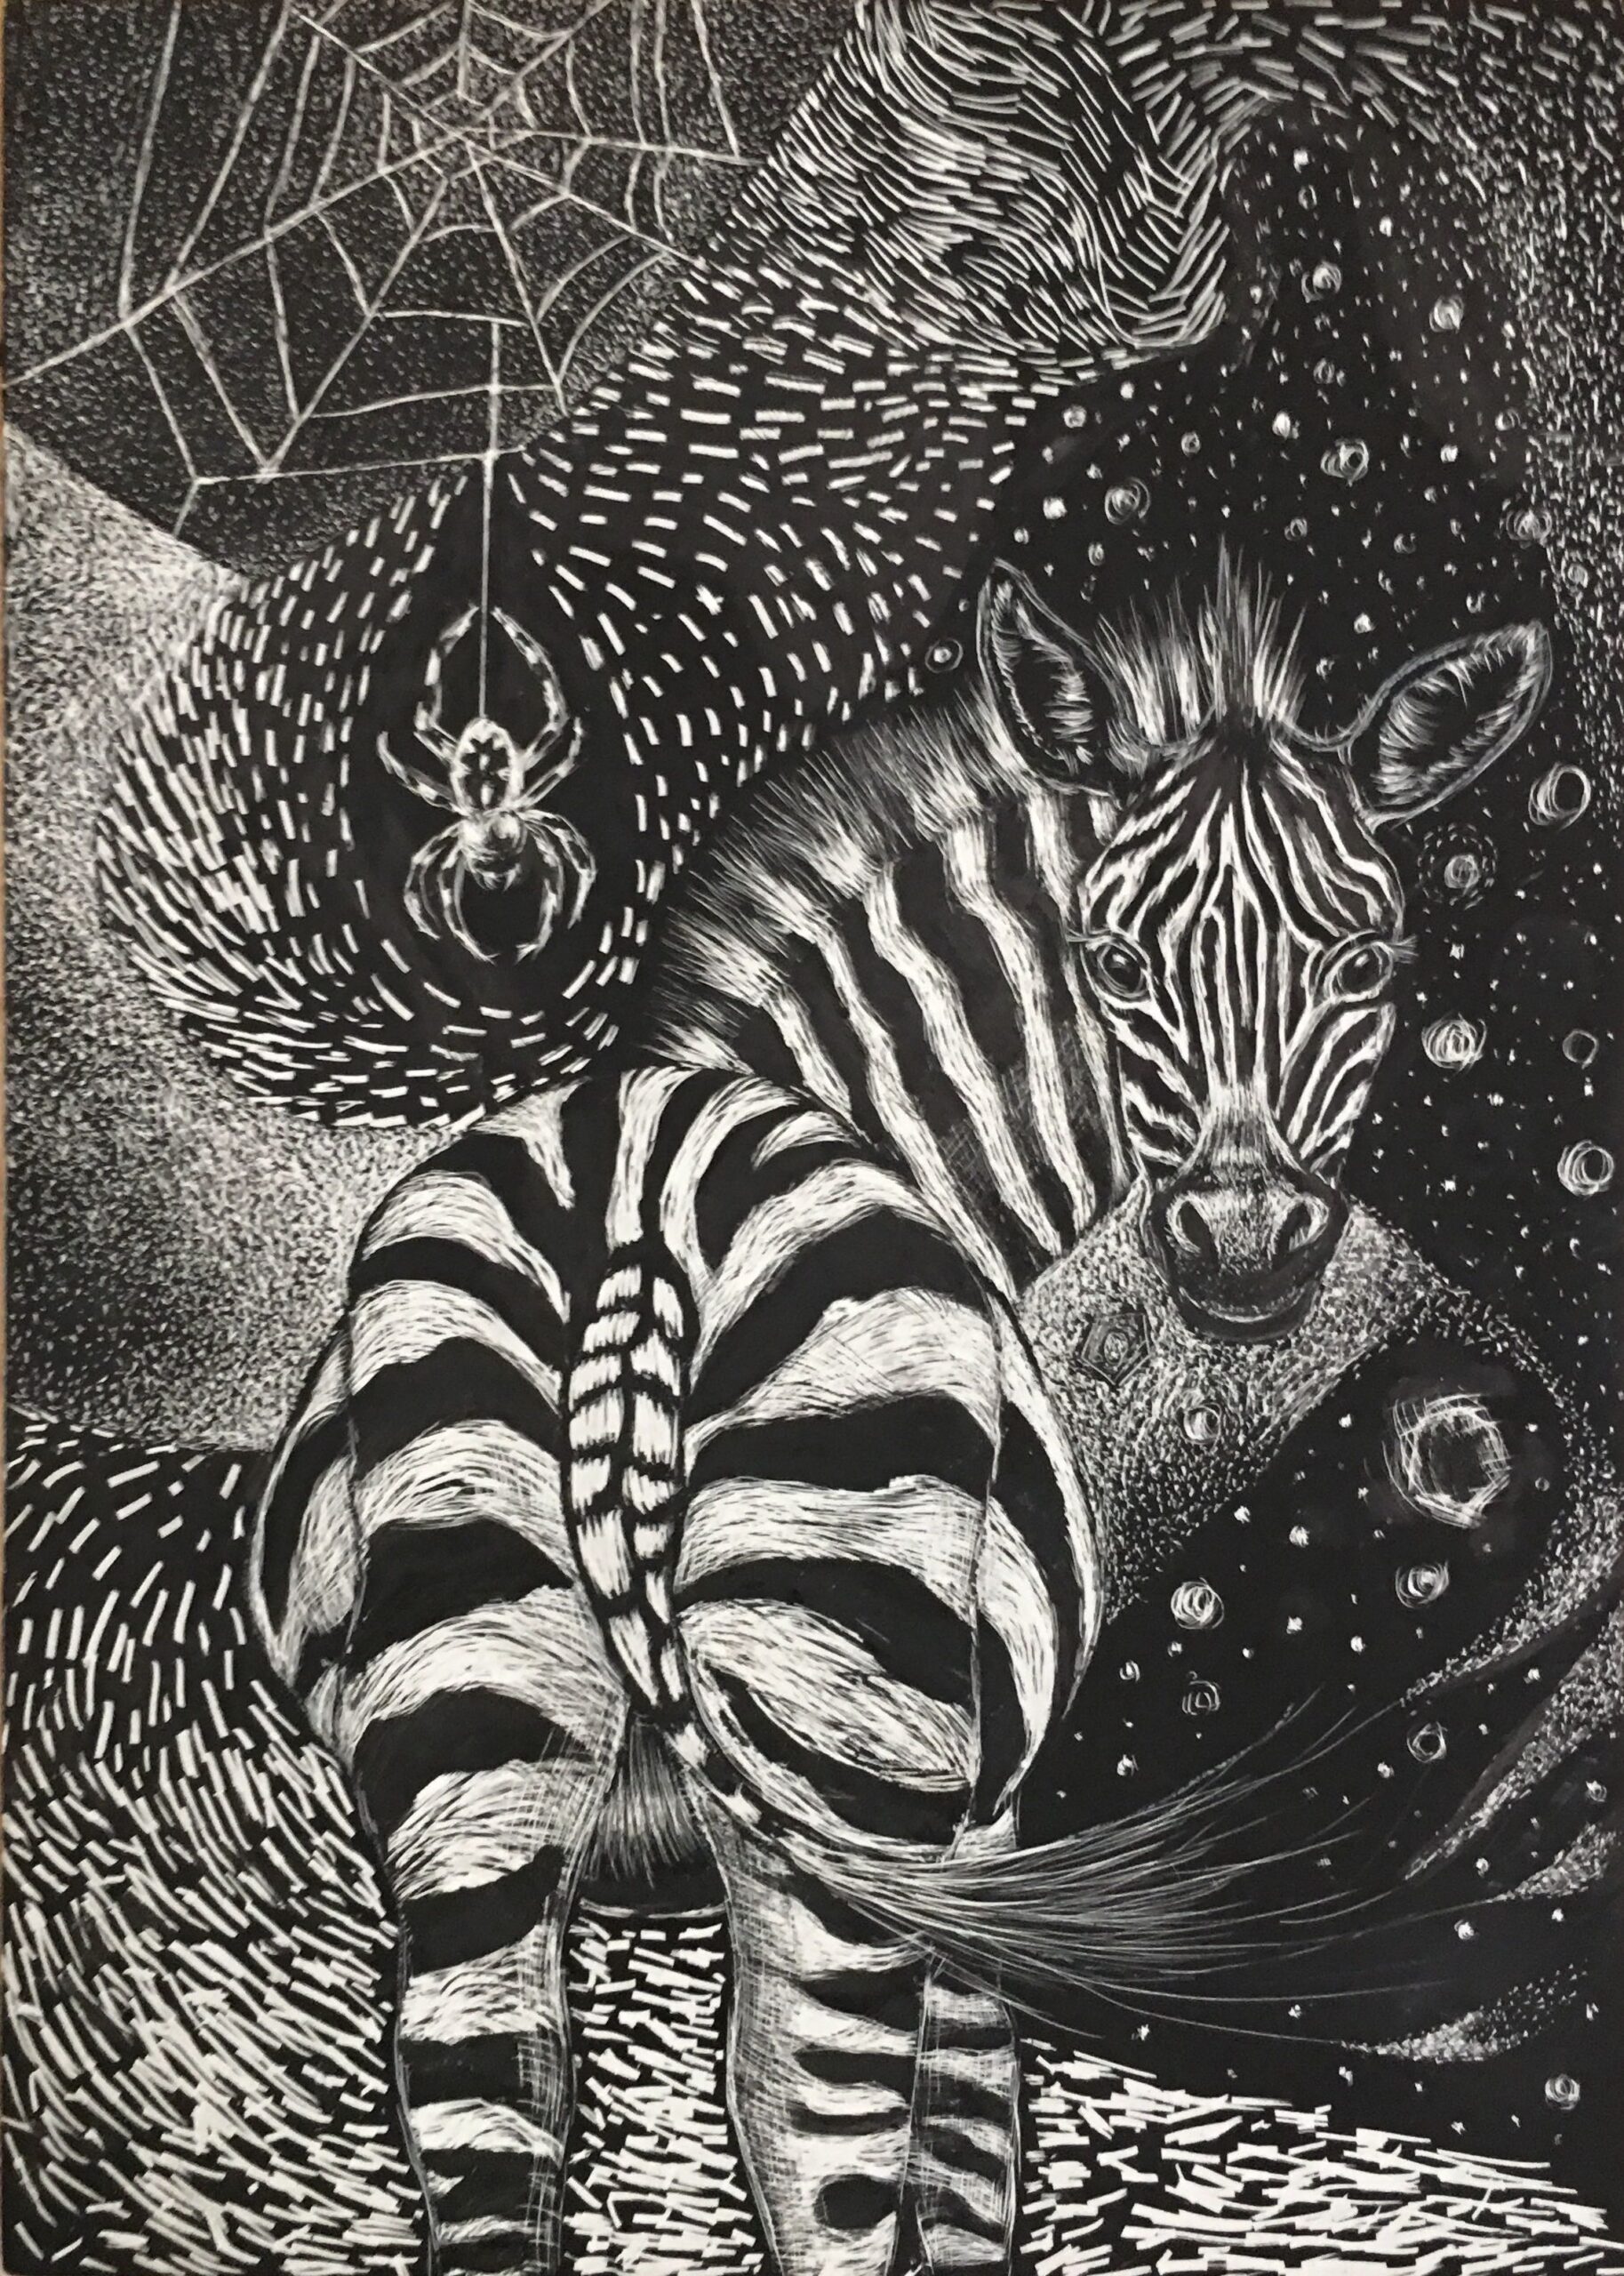 A black and white illustration of a zebra and a spider